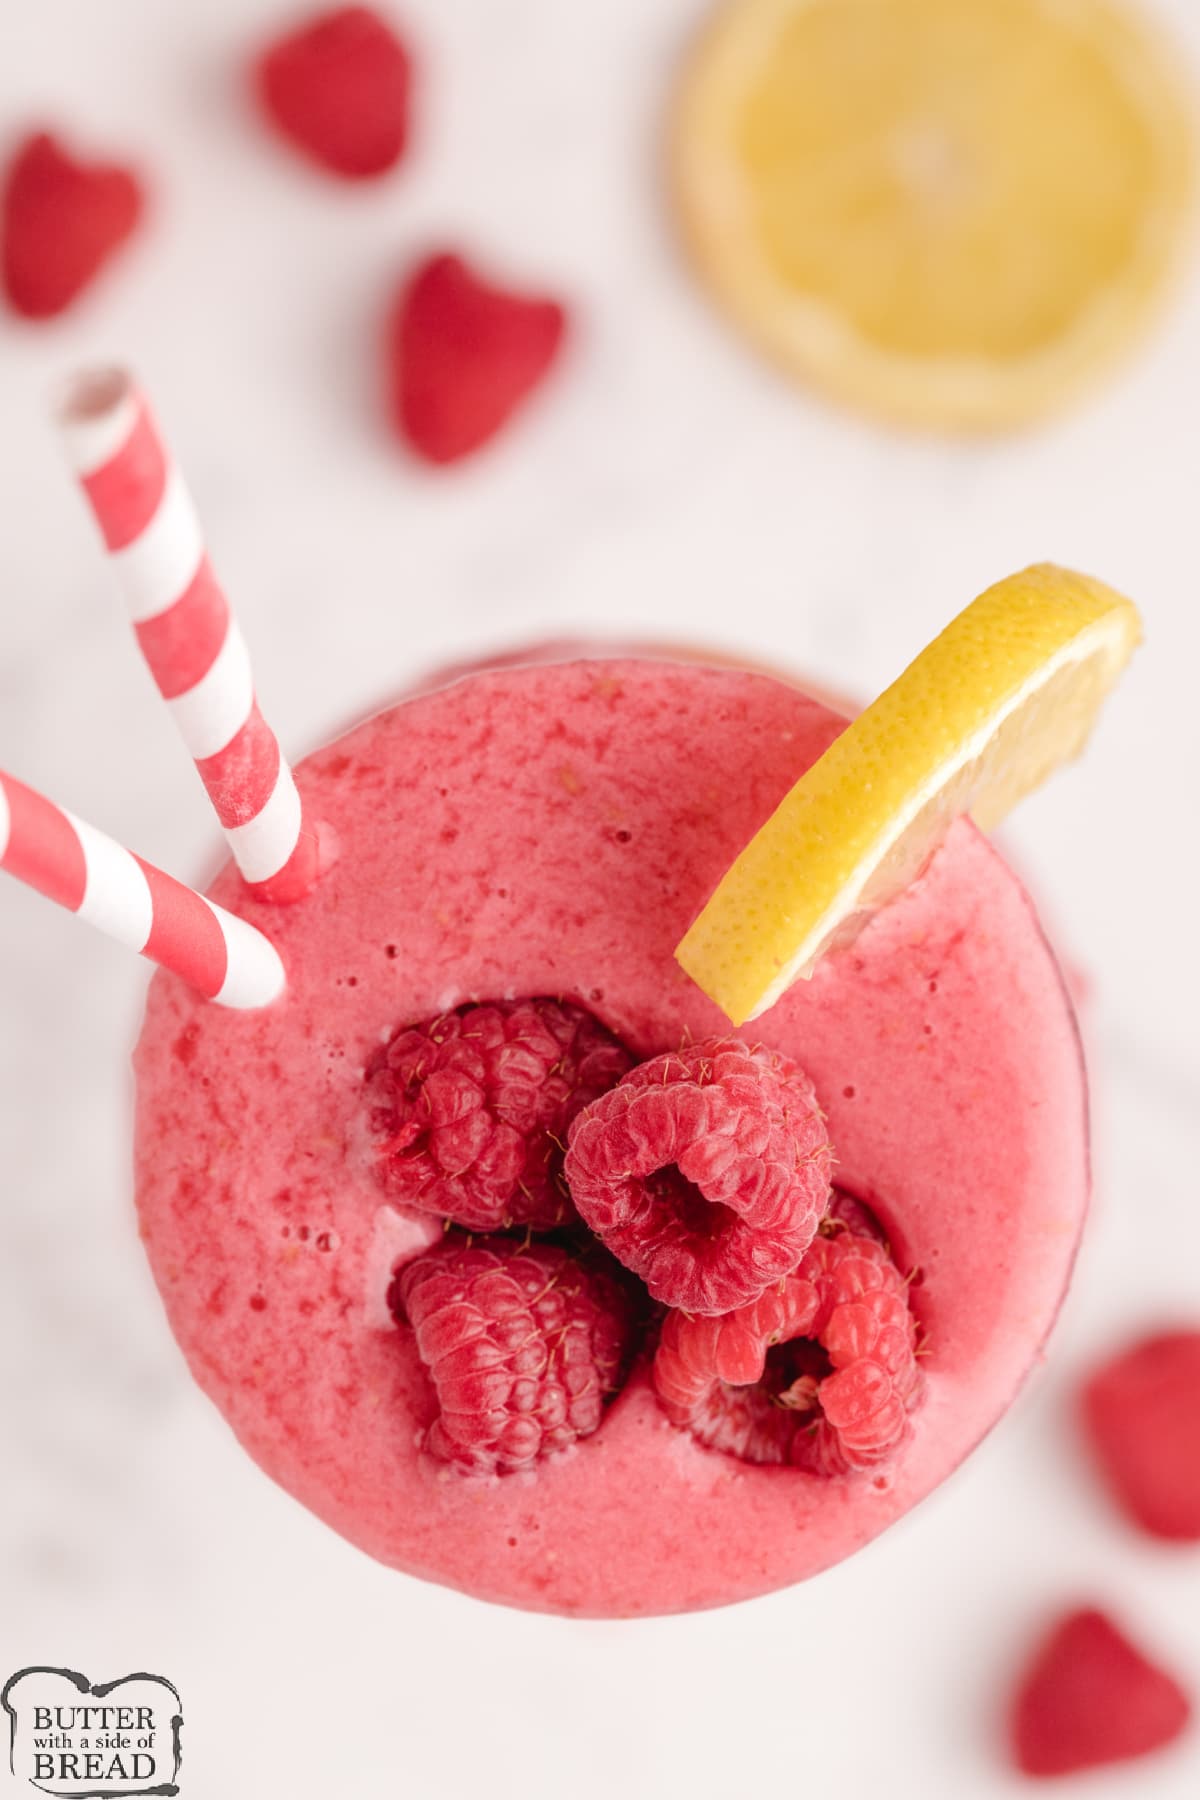 Lemon Raspberry Smoothie is a light and refreshing treat made with only 4 ingredients! This raspberry lemonade smoothie is loaded with delicious flavor and made in less than 5 minutes! 